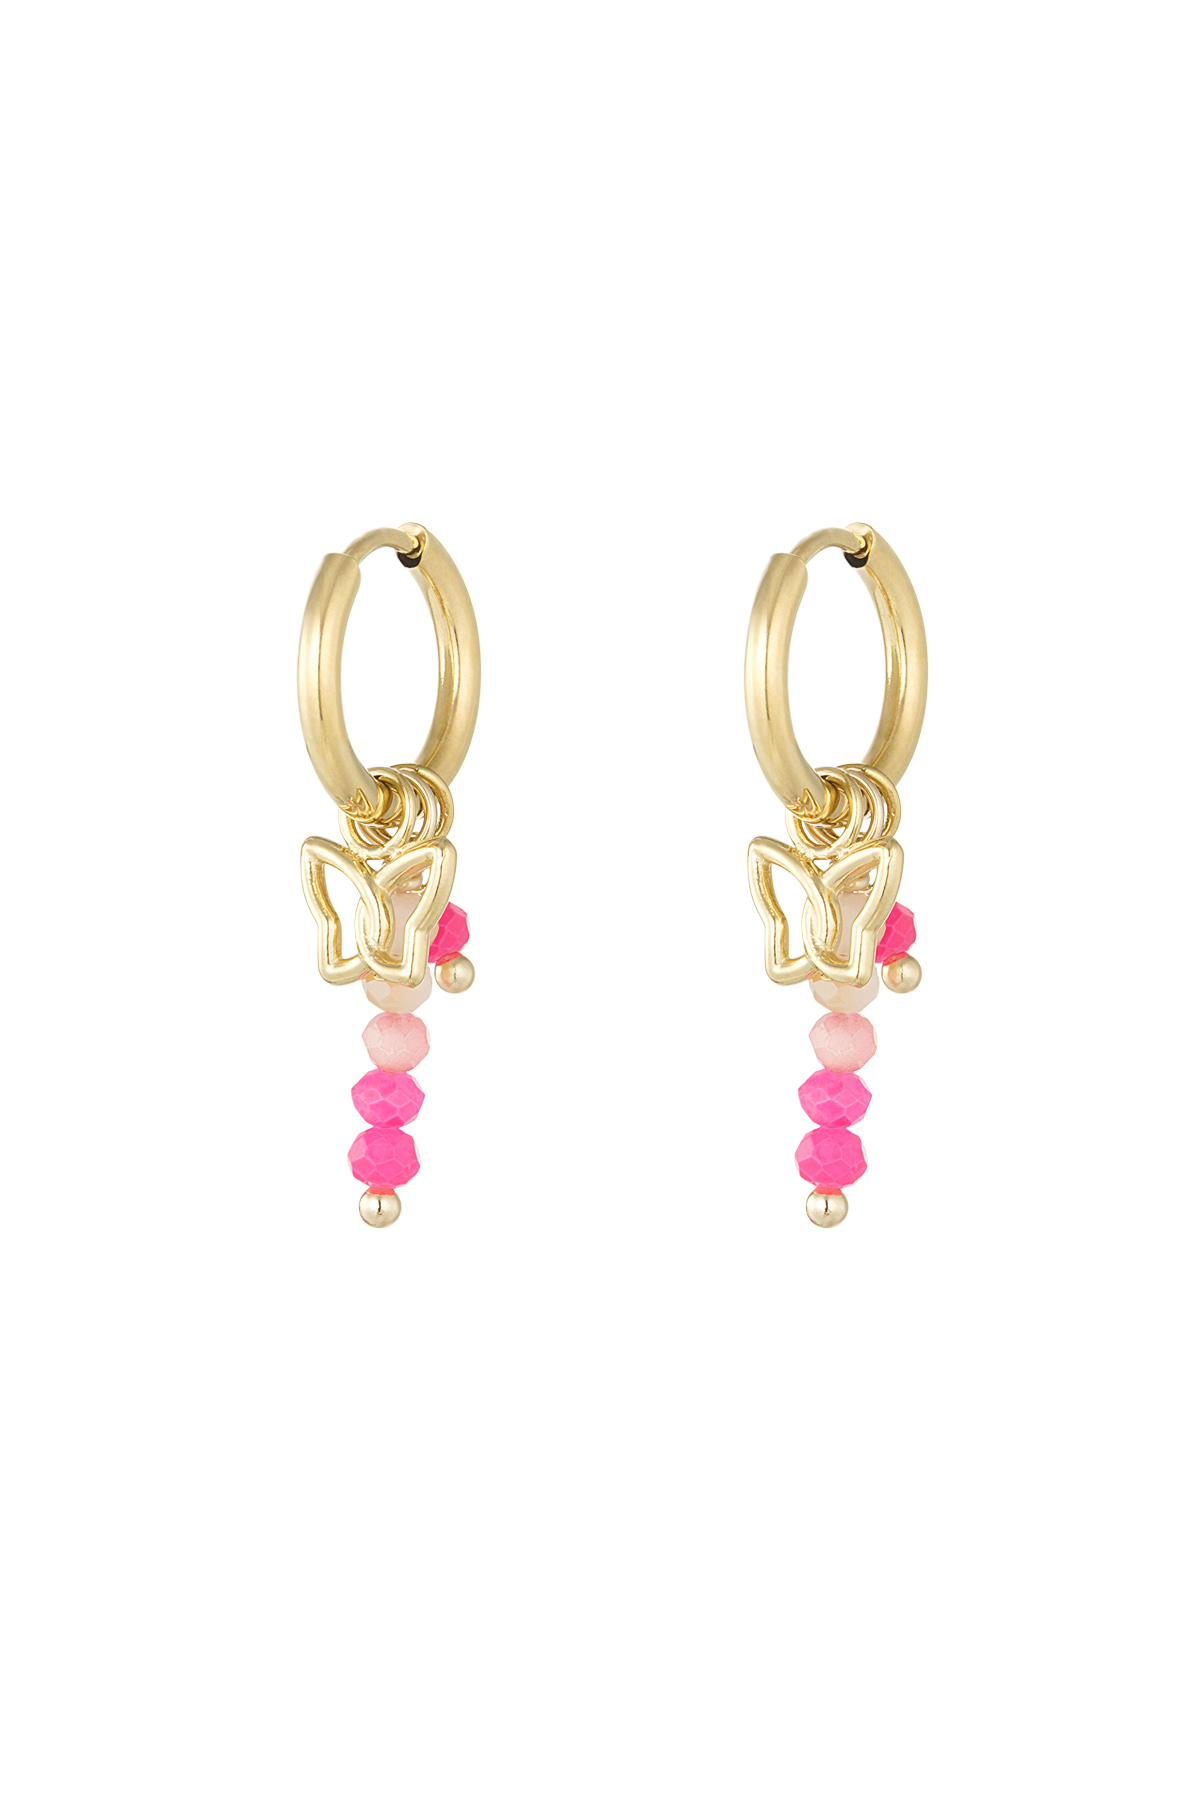 Earrings stary night - pink gold